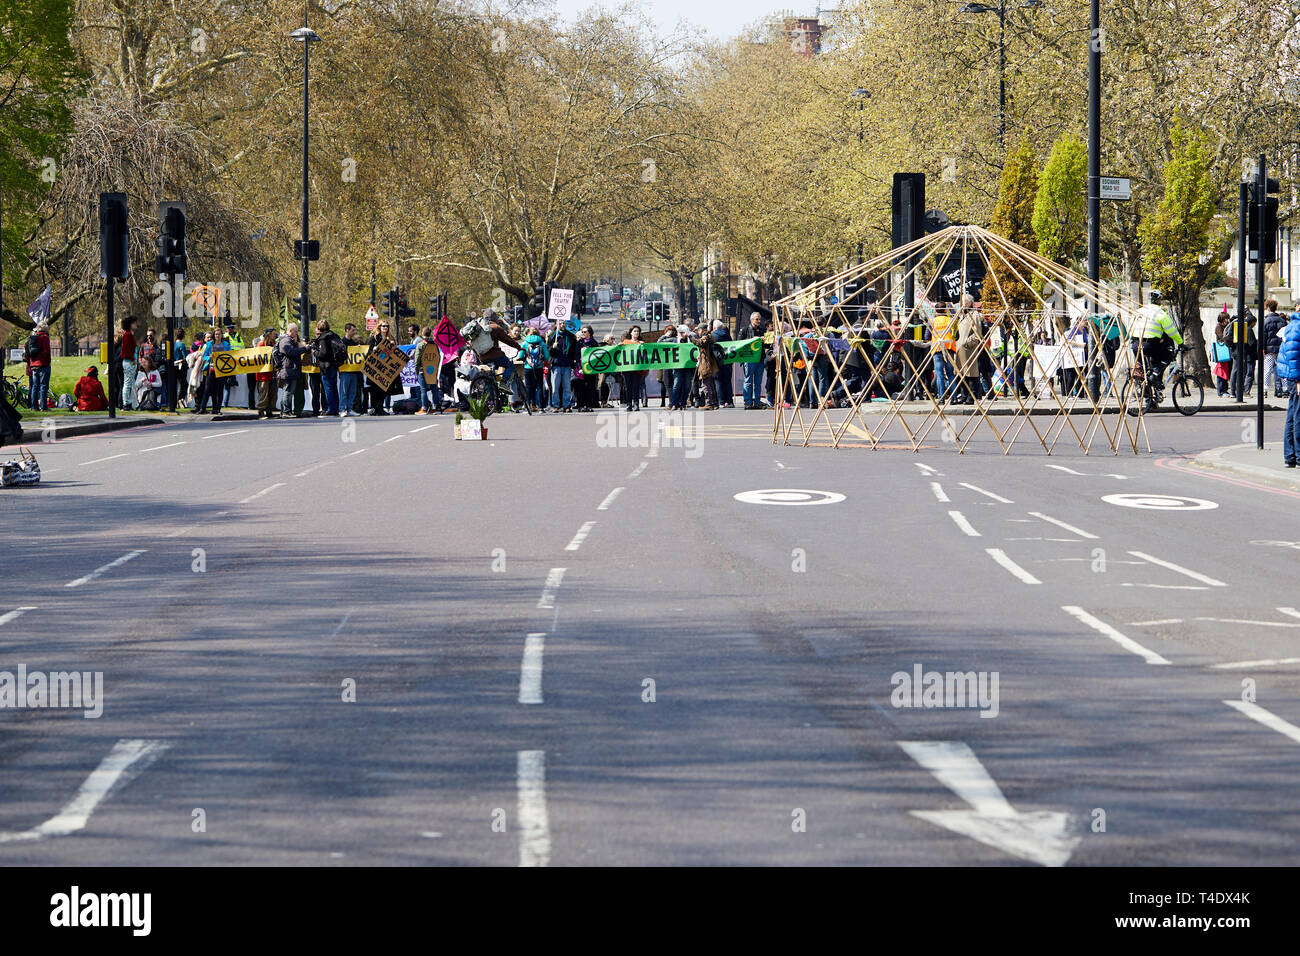 London, UK. - April 15, 2019: Members of Extinction Rebellion block roads leading to Marble Arch to promote awareness of climate change. Stock Photo